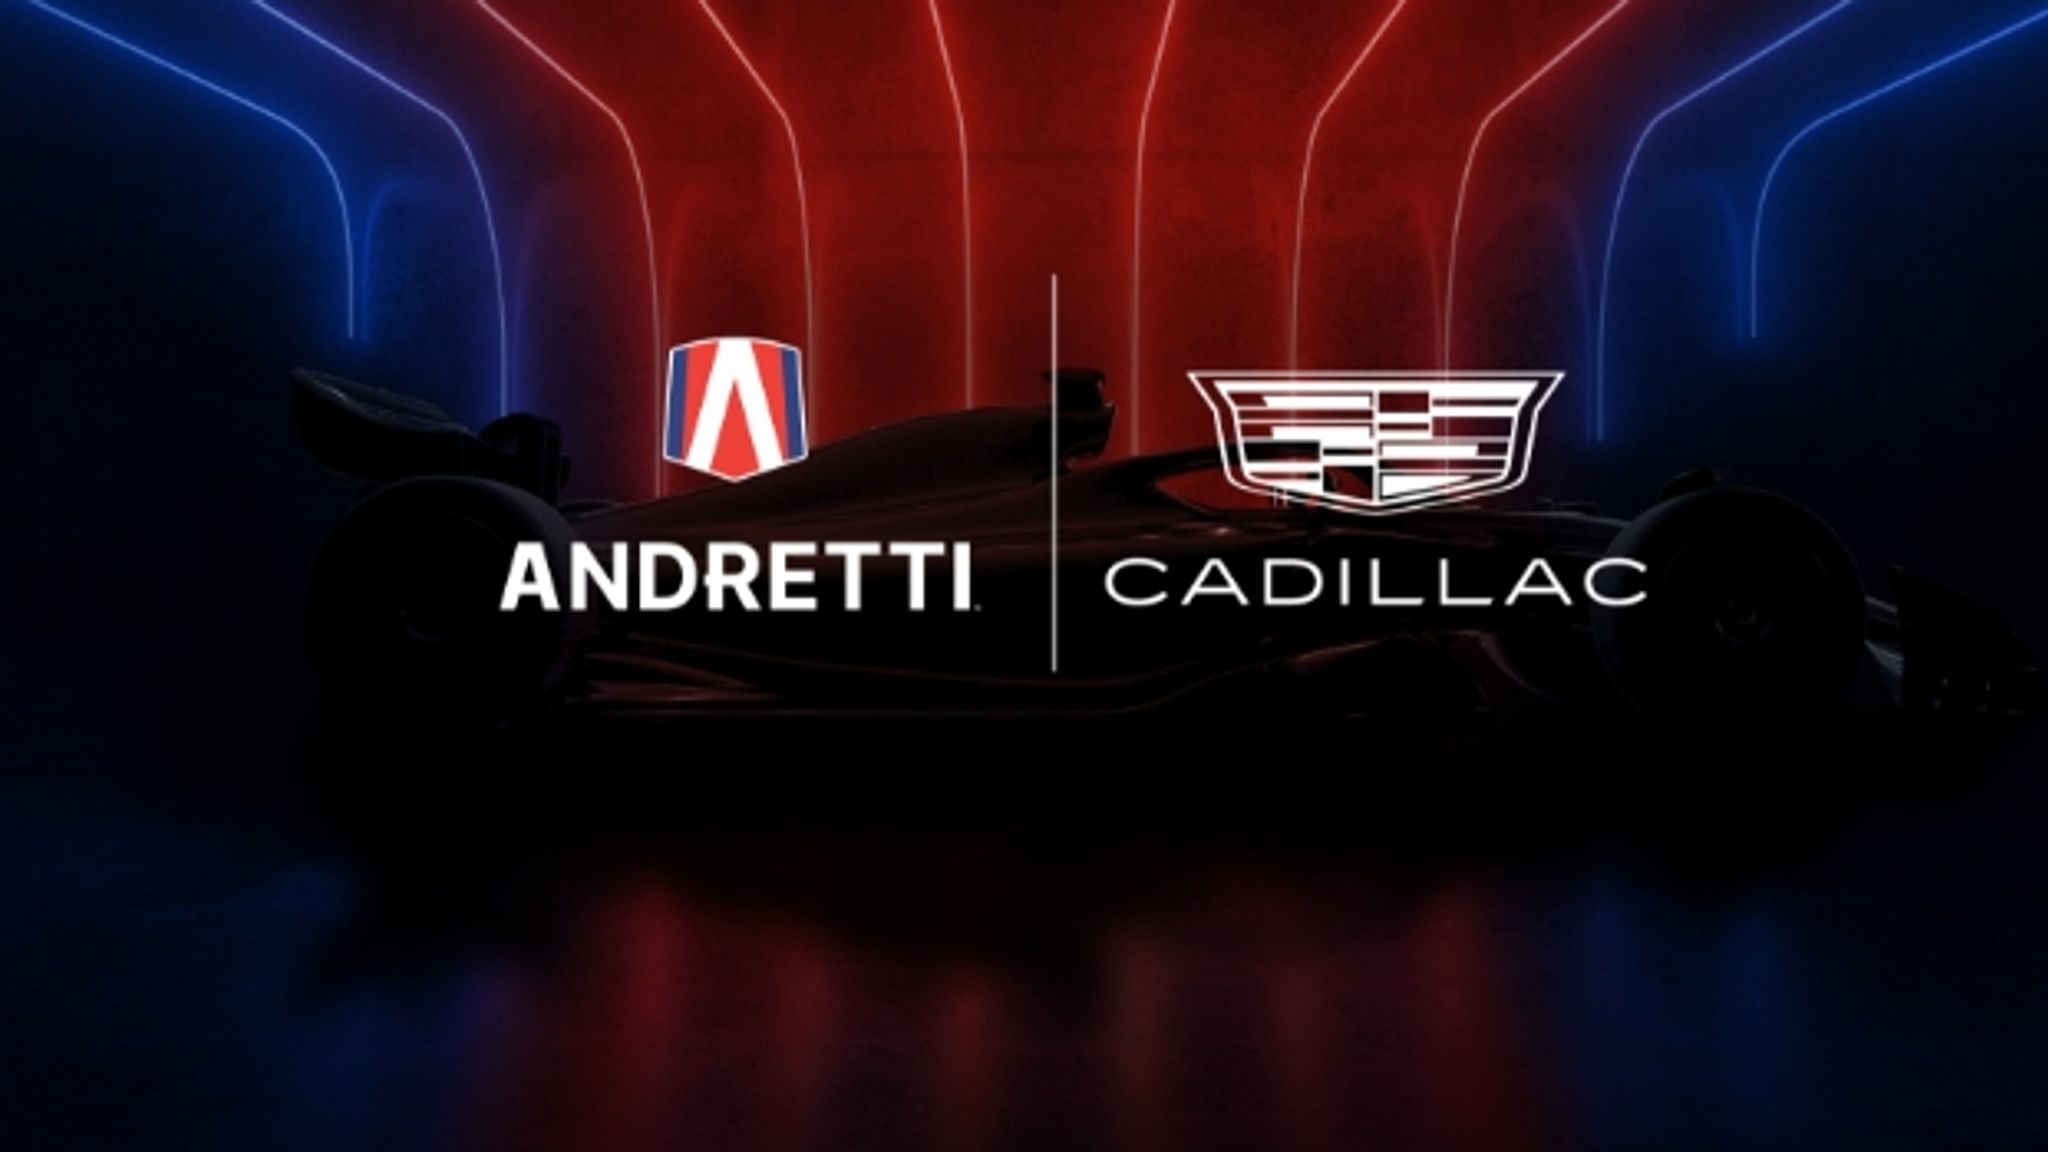 Having Cadillac on board will ‘add a lot of weight’ to Andretti’s bid